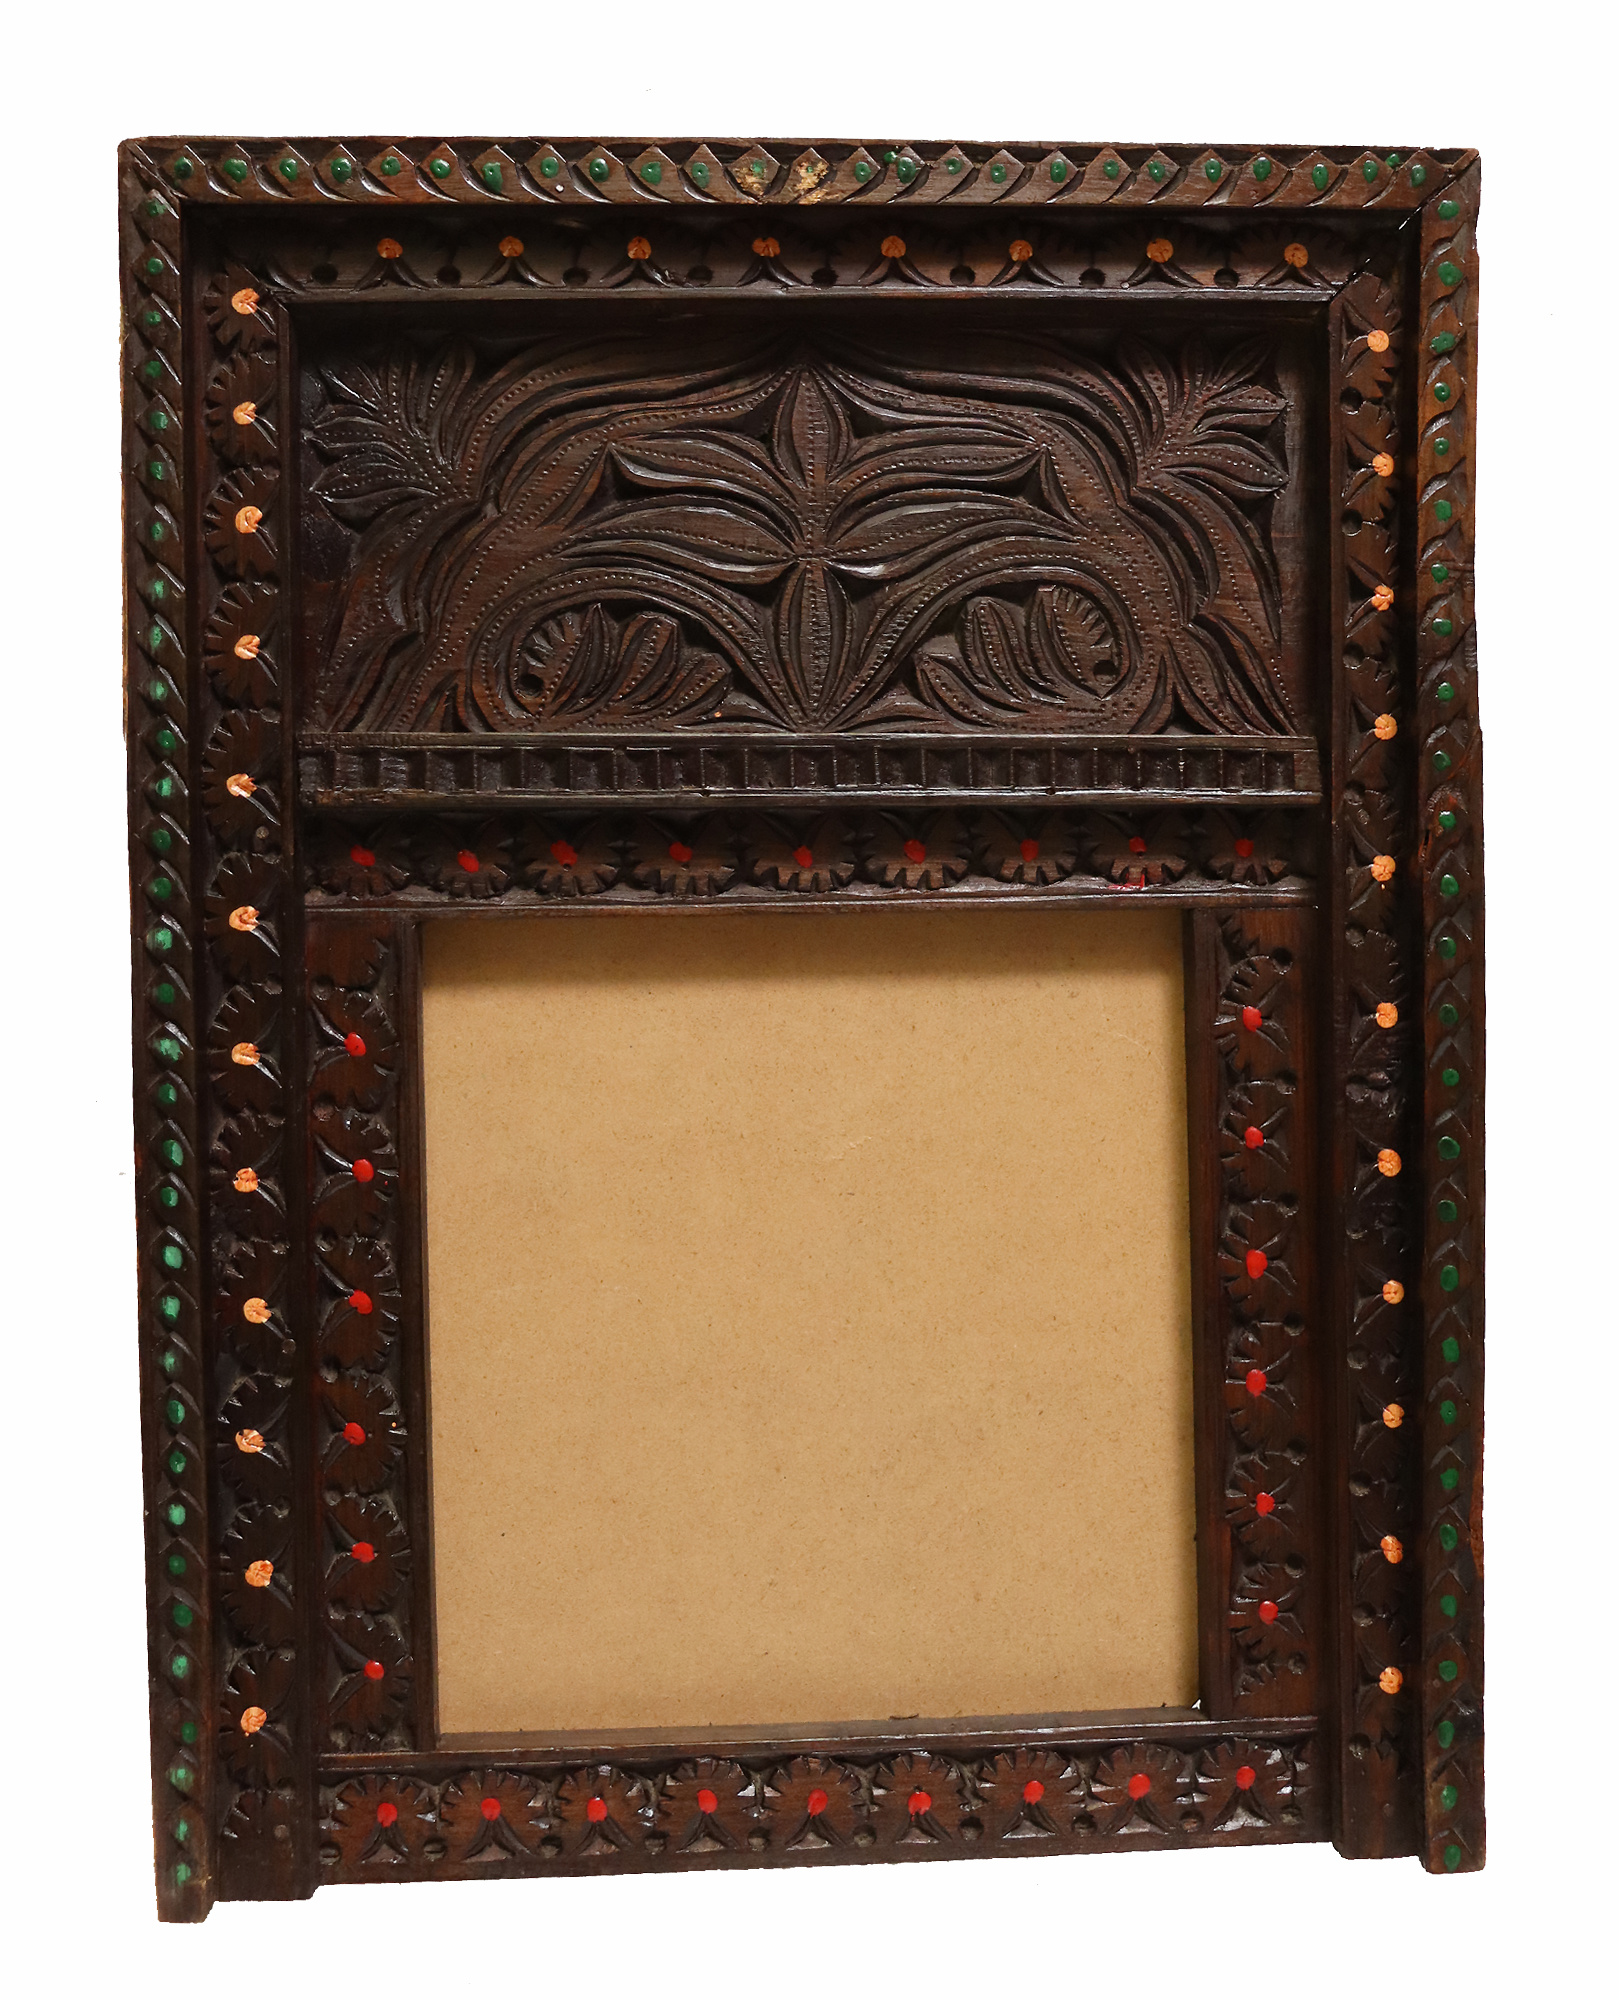 55x42  cm Hand Carved orient vintage wooden Frame picture frame mirror frame  from Afghanistan Nuristan No-23